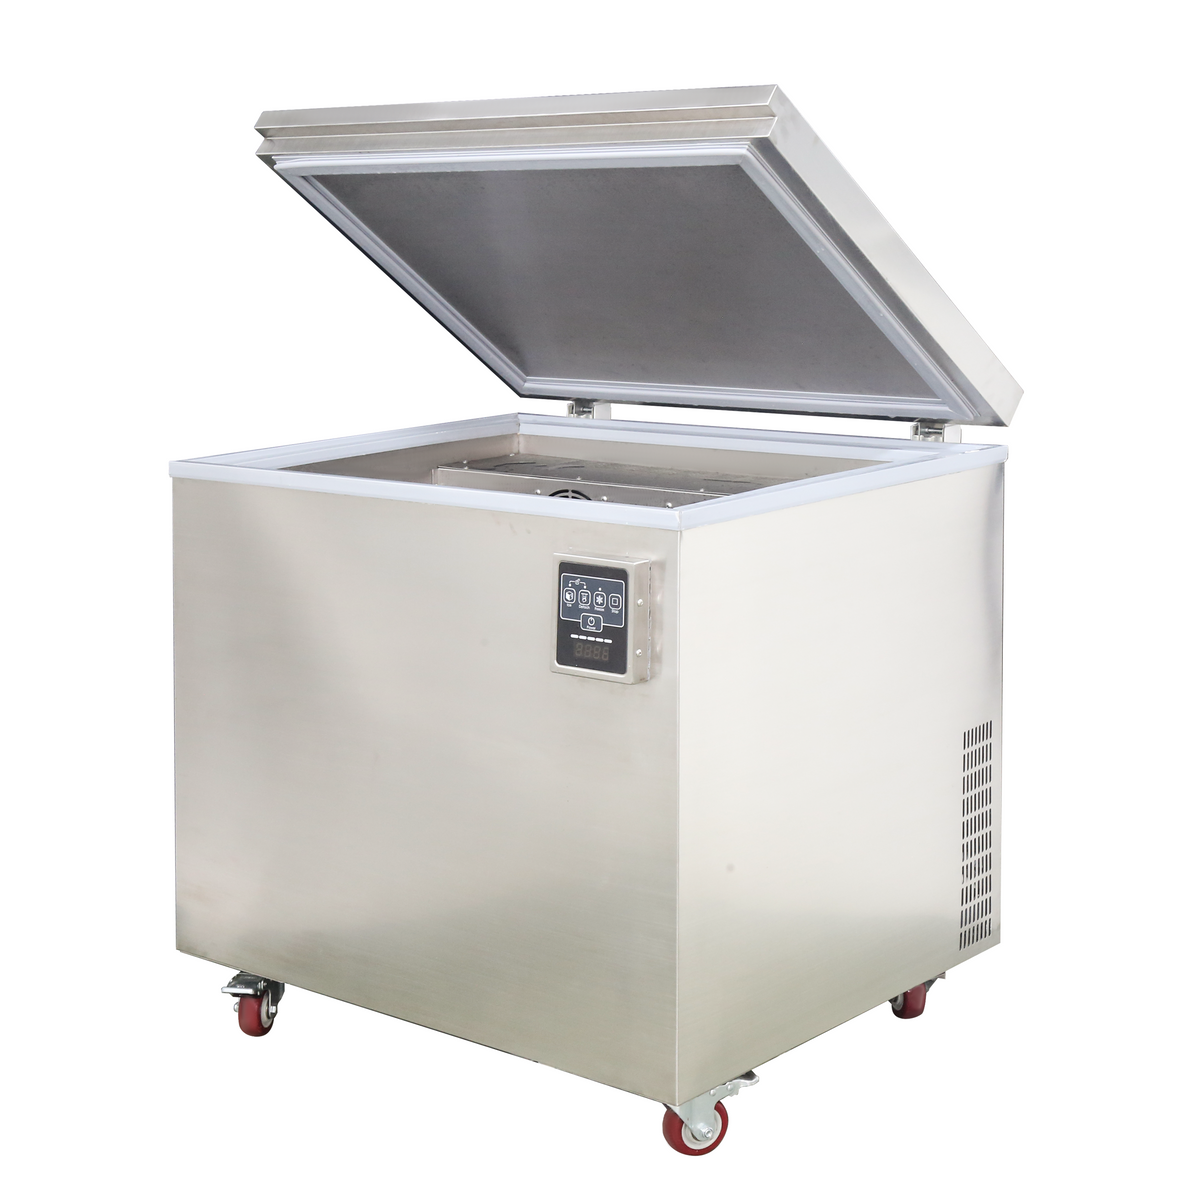 A picture of the IMT300 Skyra double tray clear ice maker with the lid open.